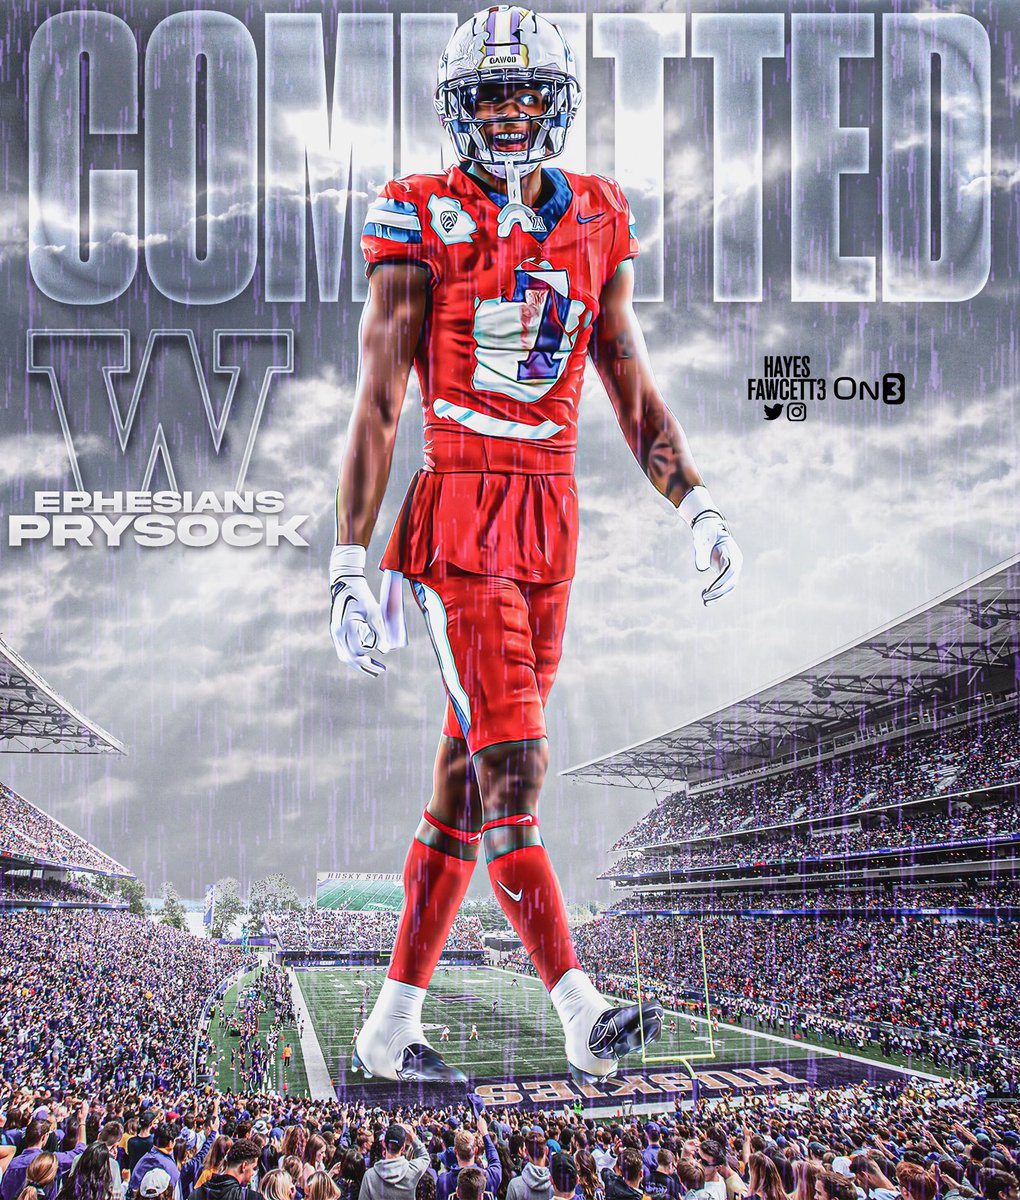 BREAKING: Former Arizona DB Ephesians Prysock has Committed to Washington, he tells @on3sports The 6’3 185 DB totaled 80 Tackles, 7 Passes Defended, & 1 INT in his 2 years with the Wildcats Will have 2 years of eligibility remaining on3.com/news/ephesians…